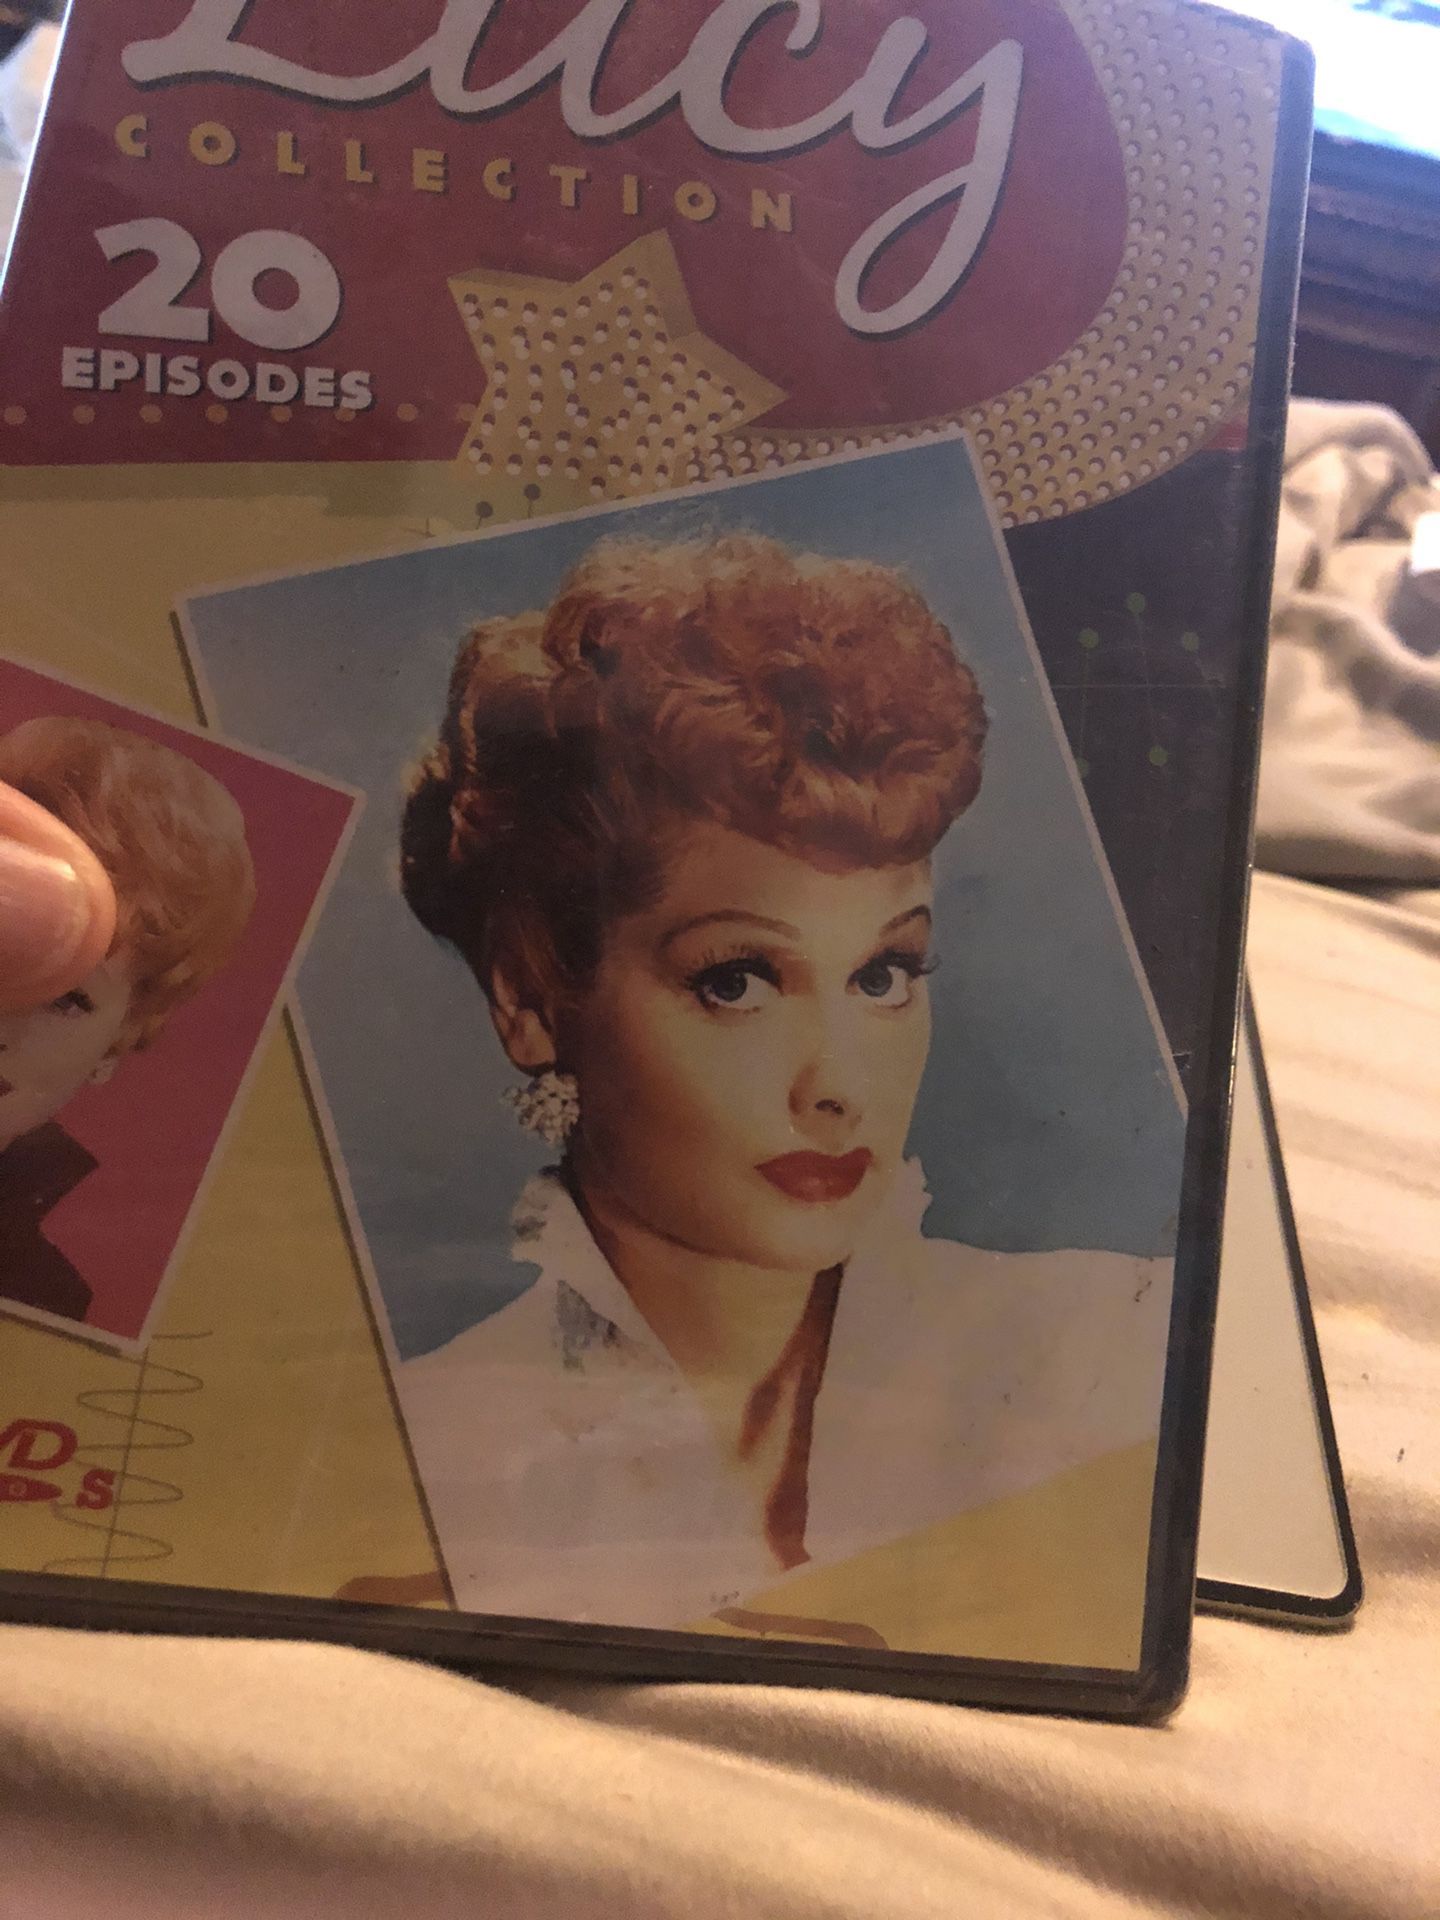 I Love Lucy DVD never opened